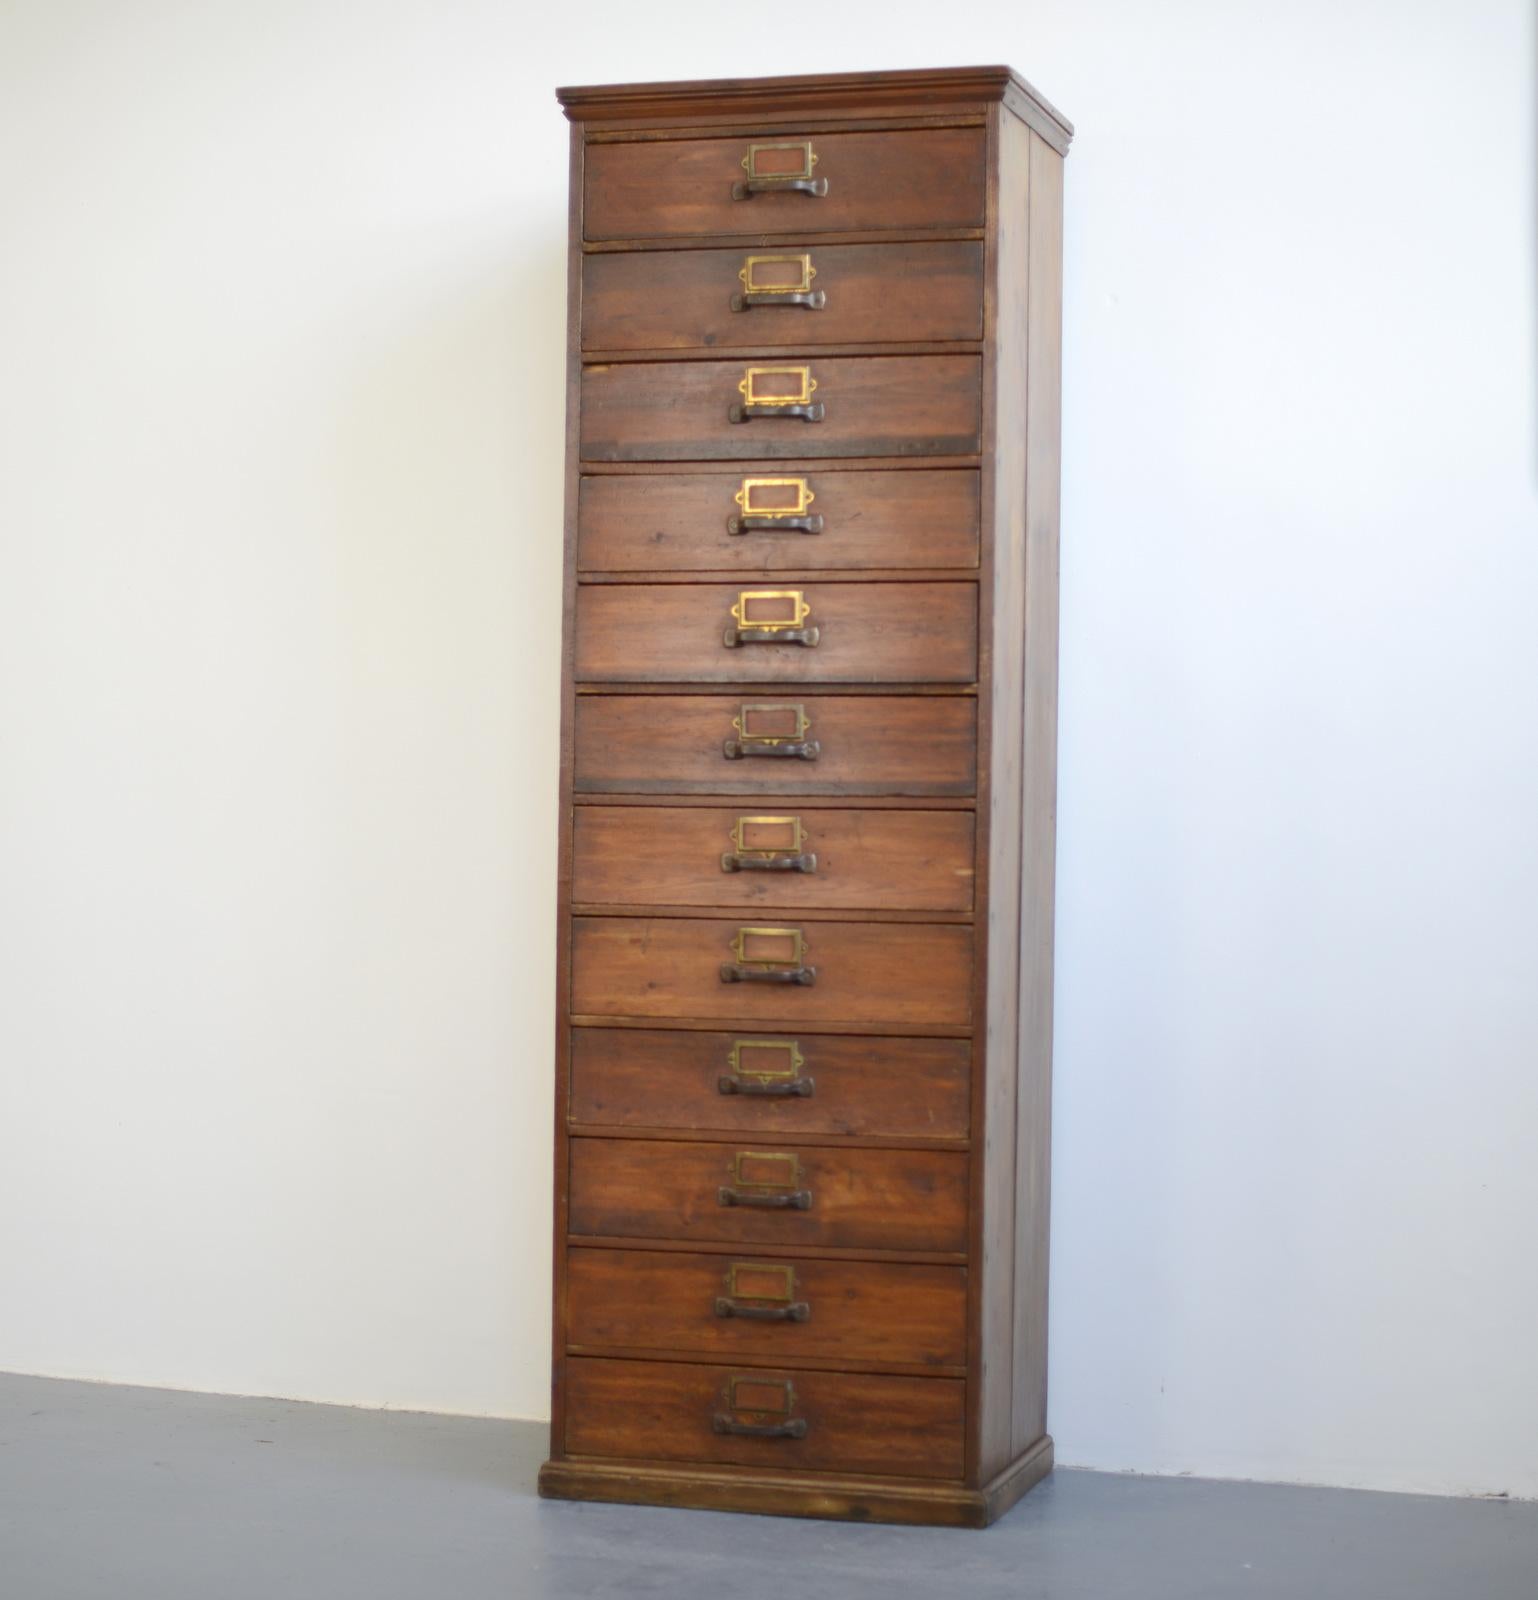 Tall pine workshop drawers, circa 1930s

- Pine drawers and frame
- Rolled tin handles 
- Brass card holders
- English ~ 1930s
- Measures: 180cm tall x 41cm deep x 59cm wide

Condition report

All drawers run smoothly and the cabinet has